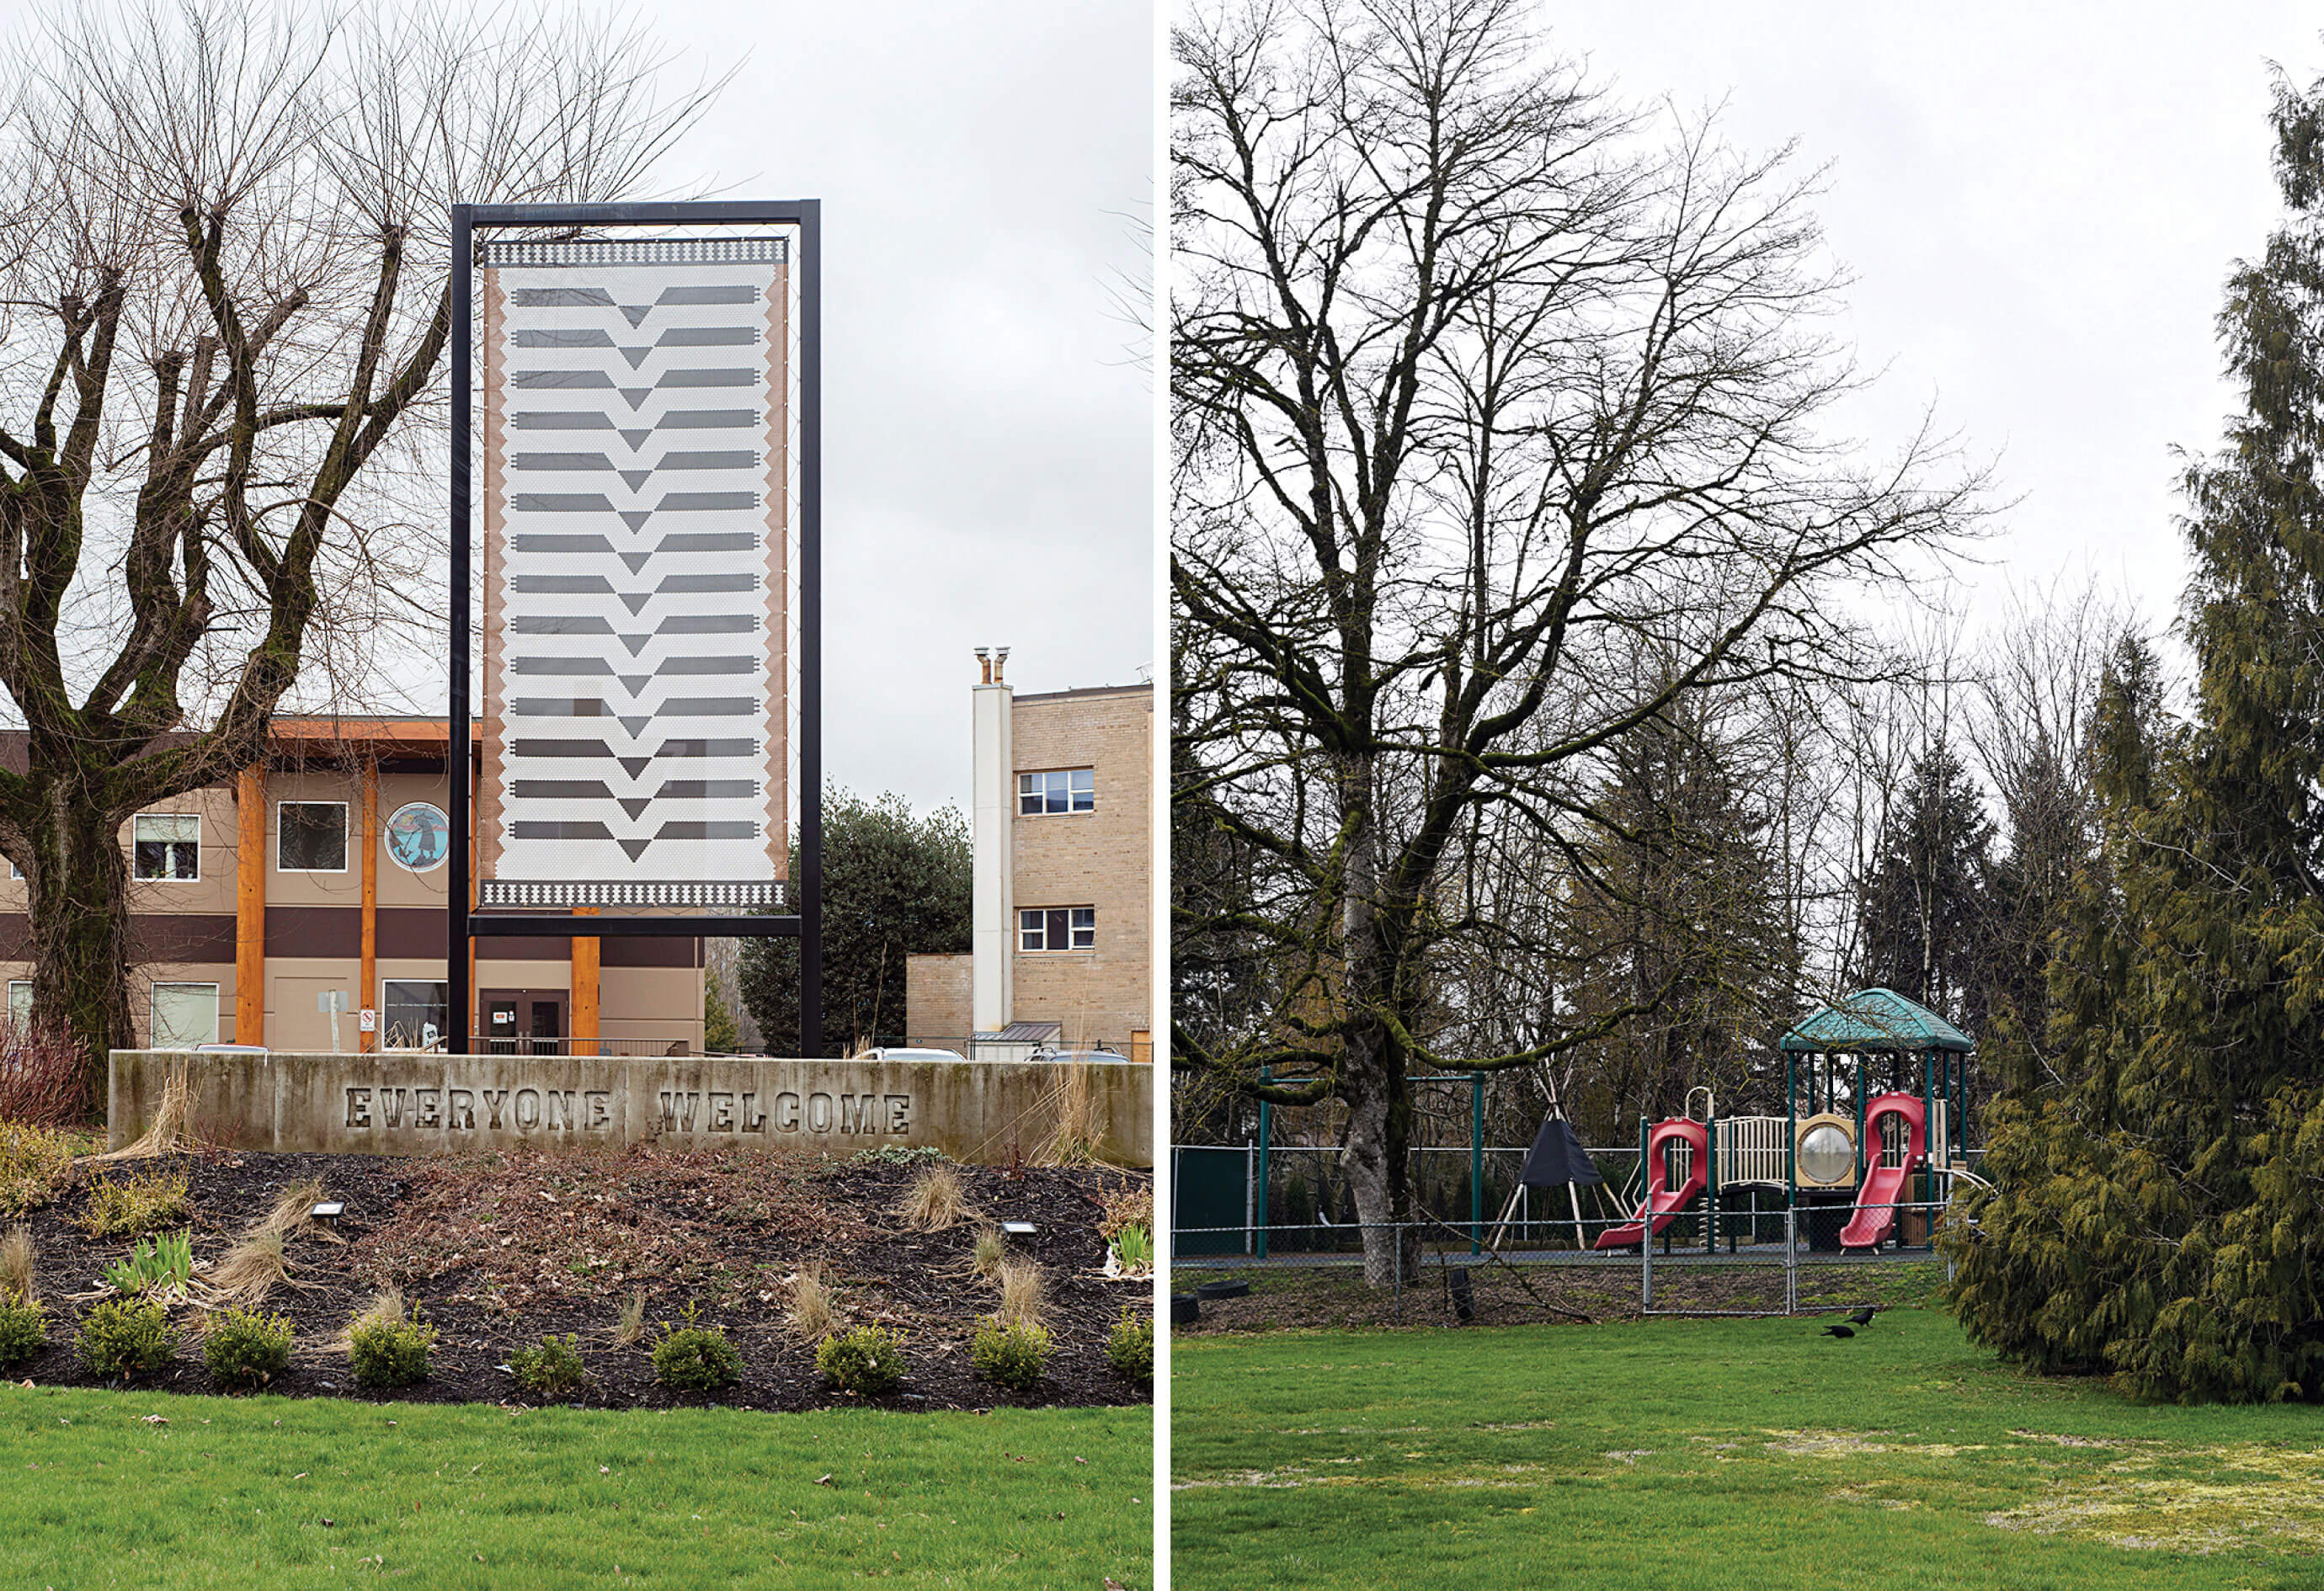 Left: The entrance of the Stó:lō Service Agency. Right: The playground behind A:lmélháwtxw.